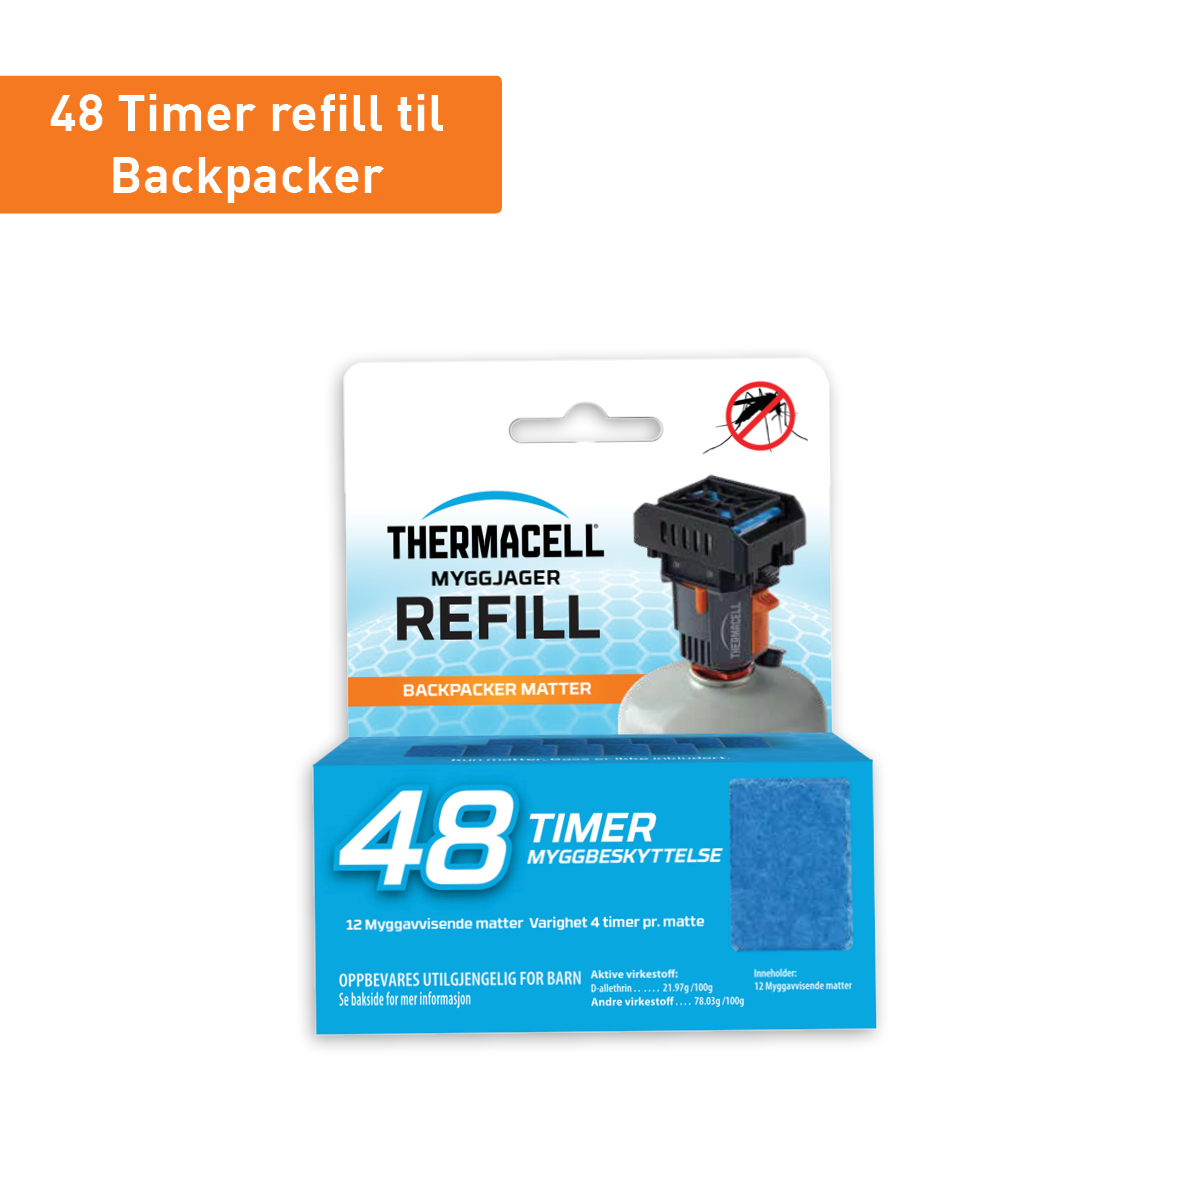 Thermacell Myggjager Backpacker 48t refill Webbilde